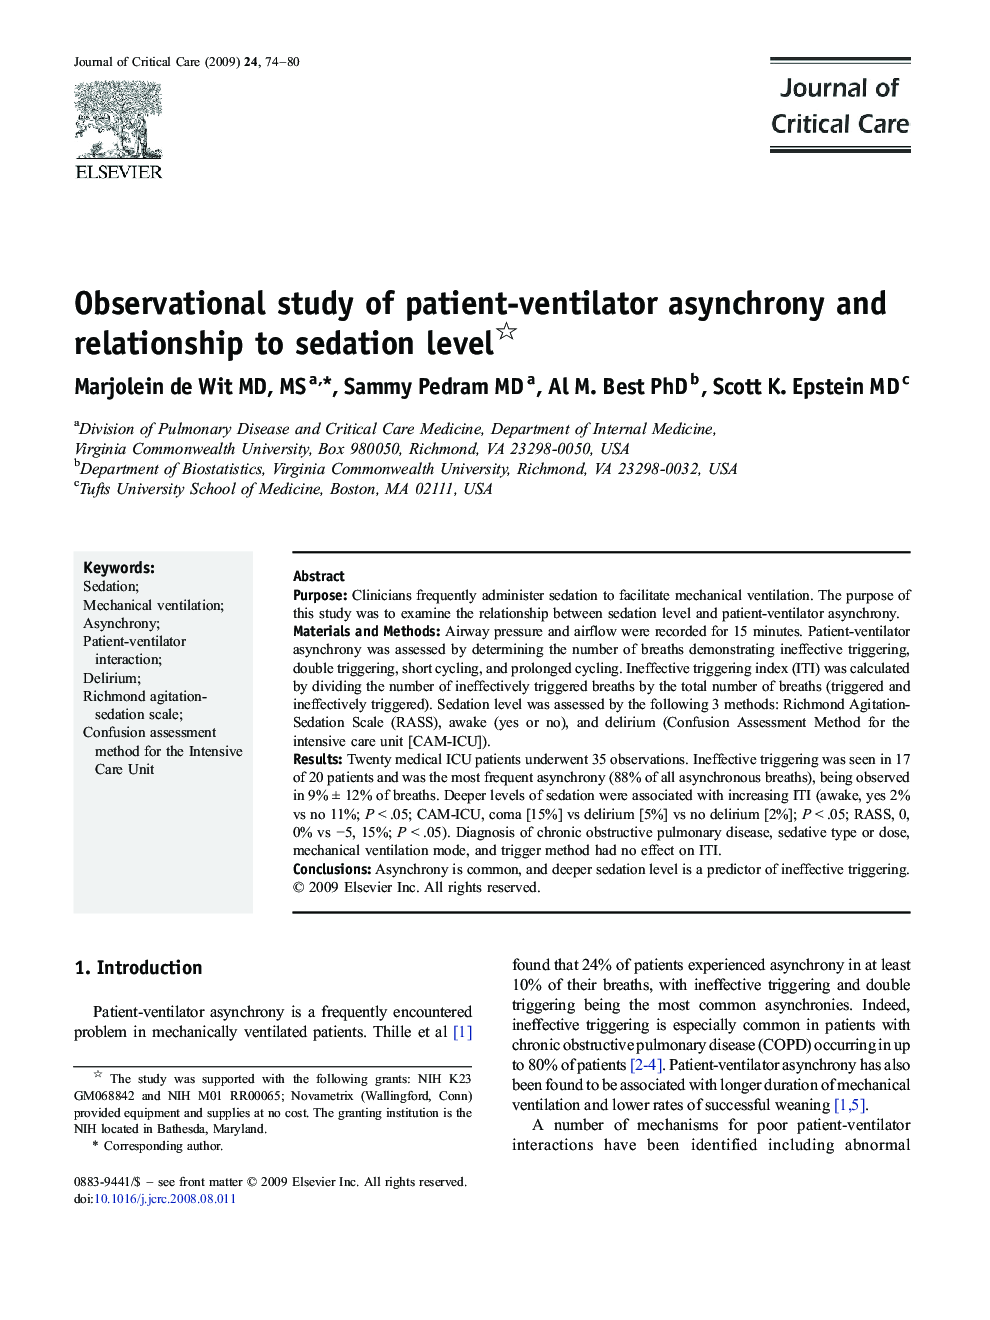 Observational study of patient-ventilator asynchrony and relationship to sedation level 